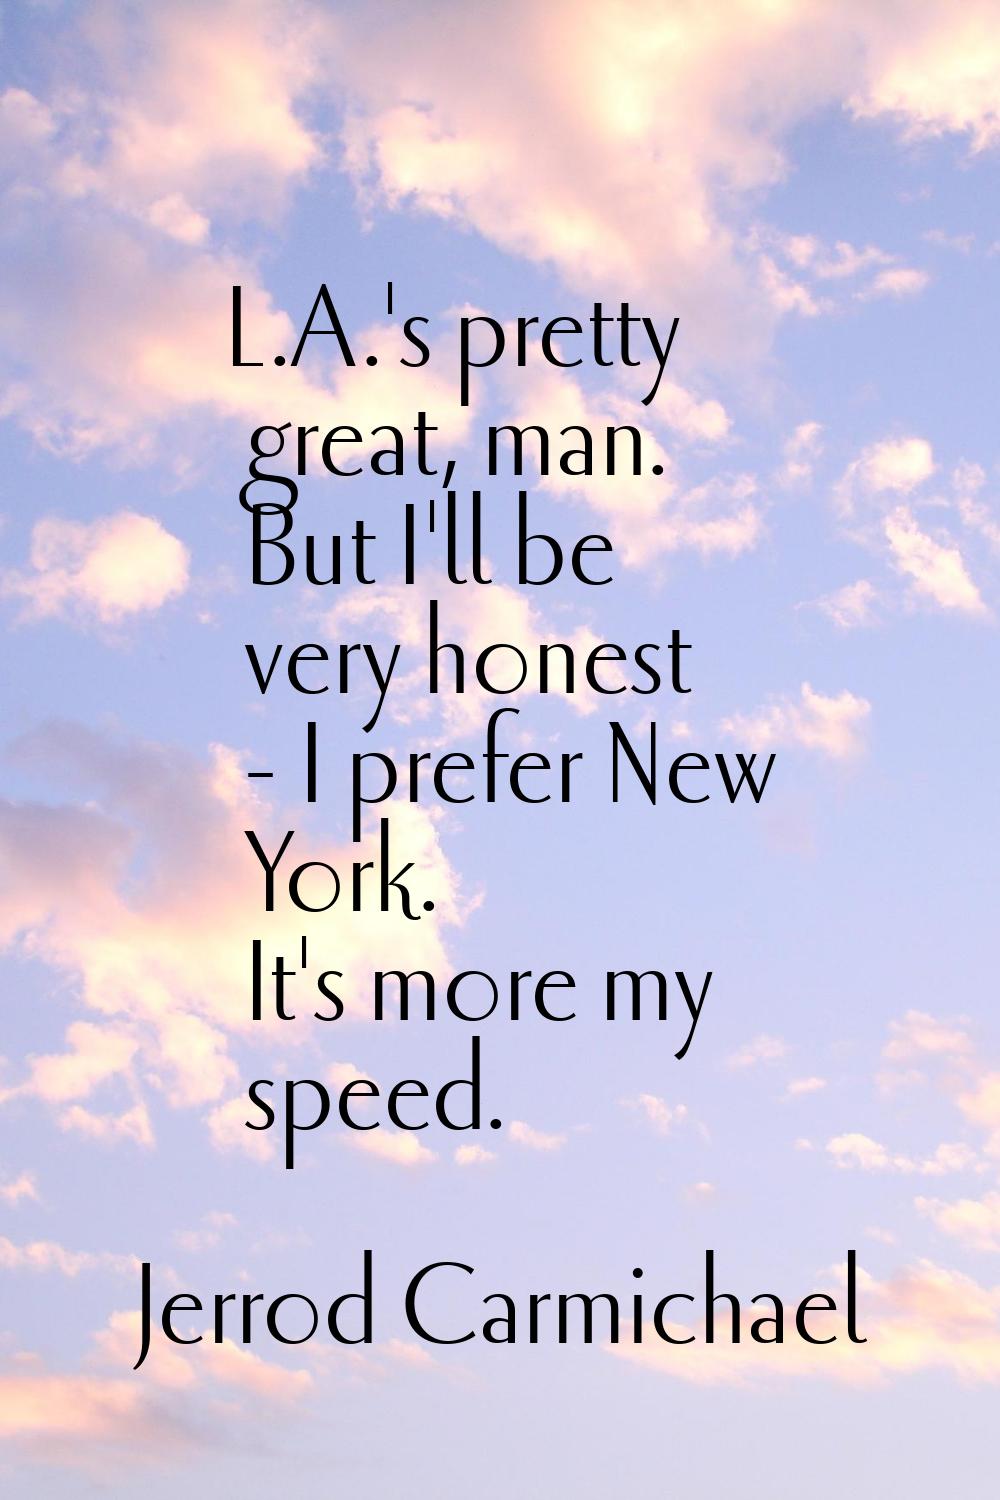 L.A.'s pretty great, man. But I'll be very honest - I prefer New York. It's more my speed.